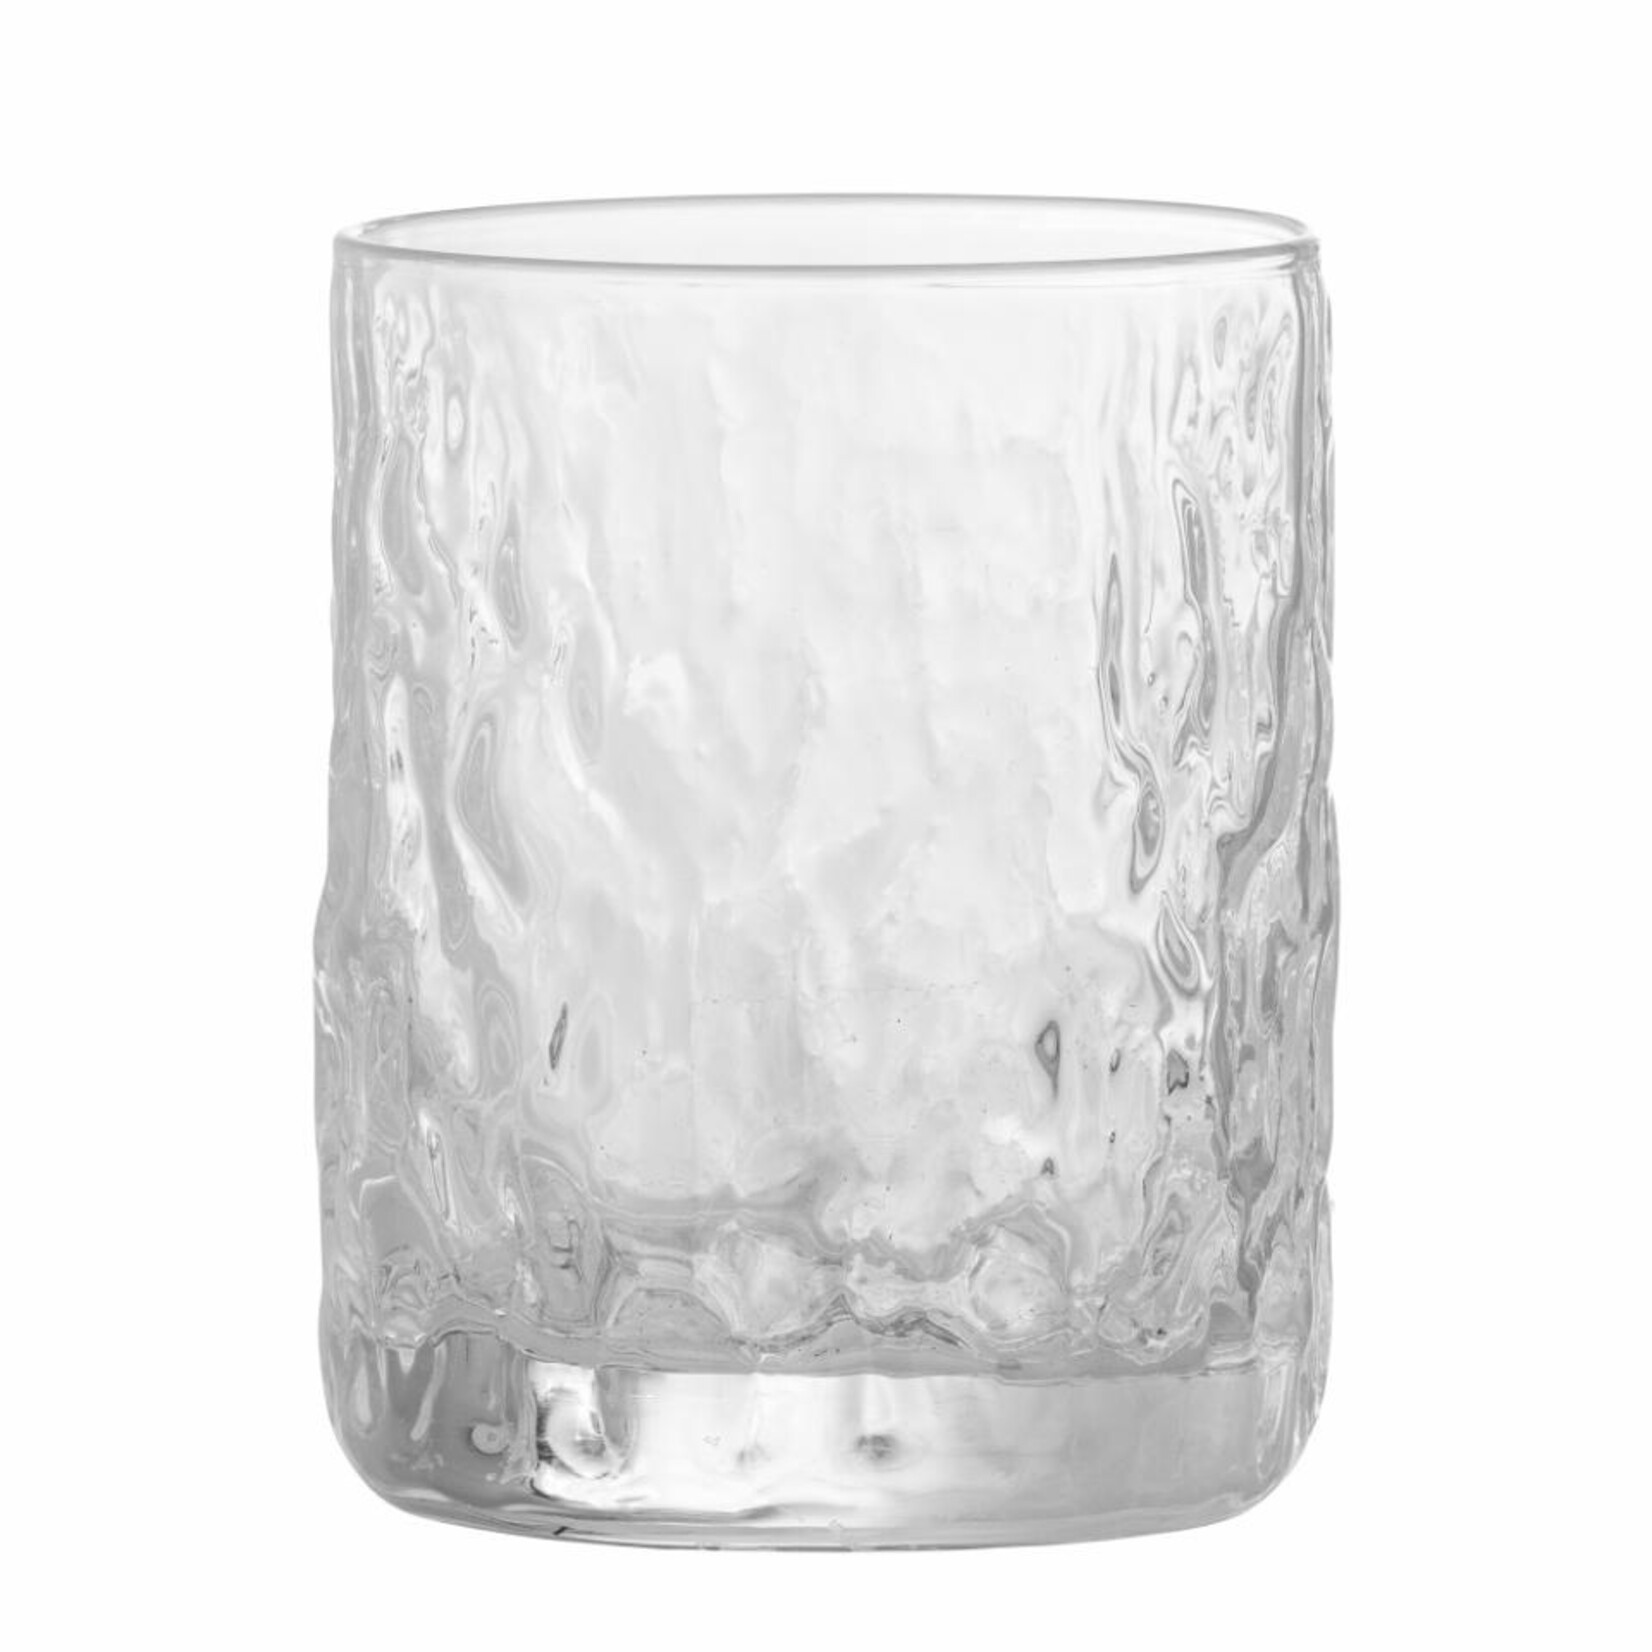 Bloomingville Hammered Drinking Glass 8oz